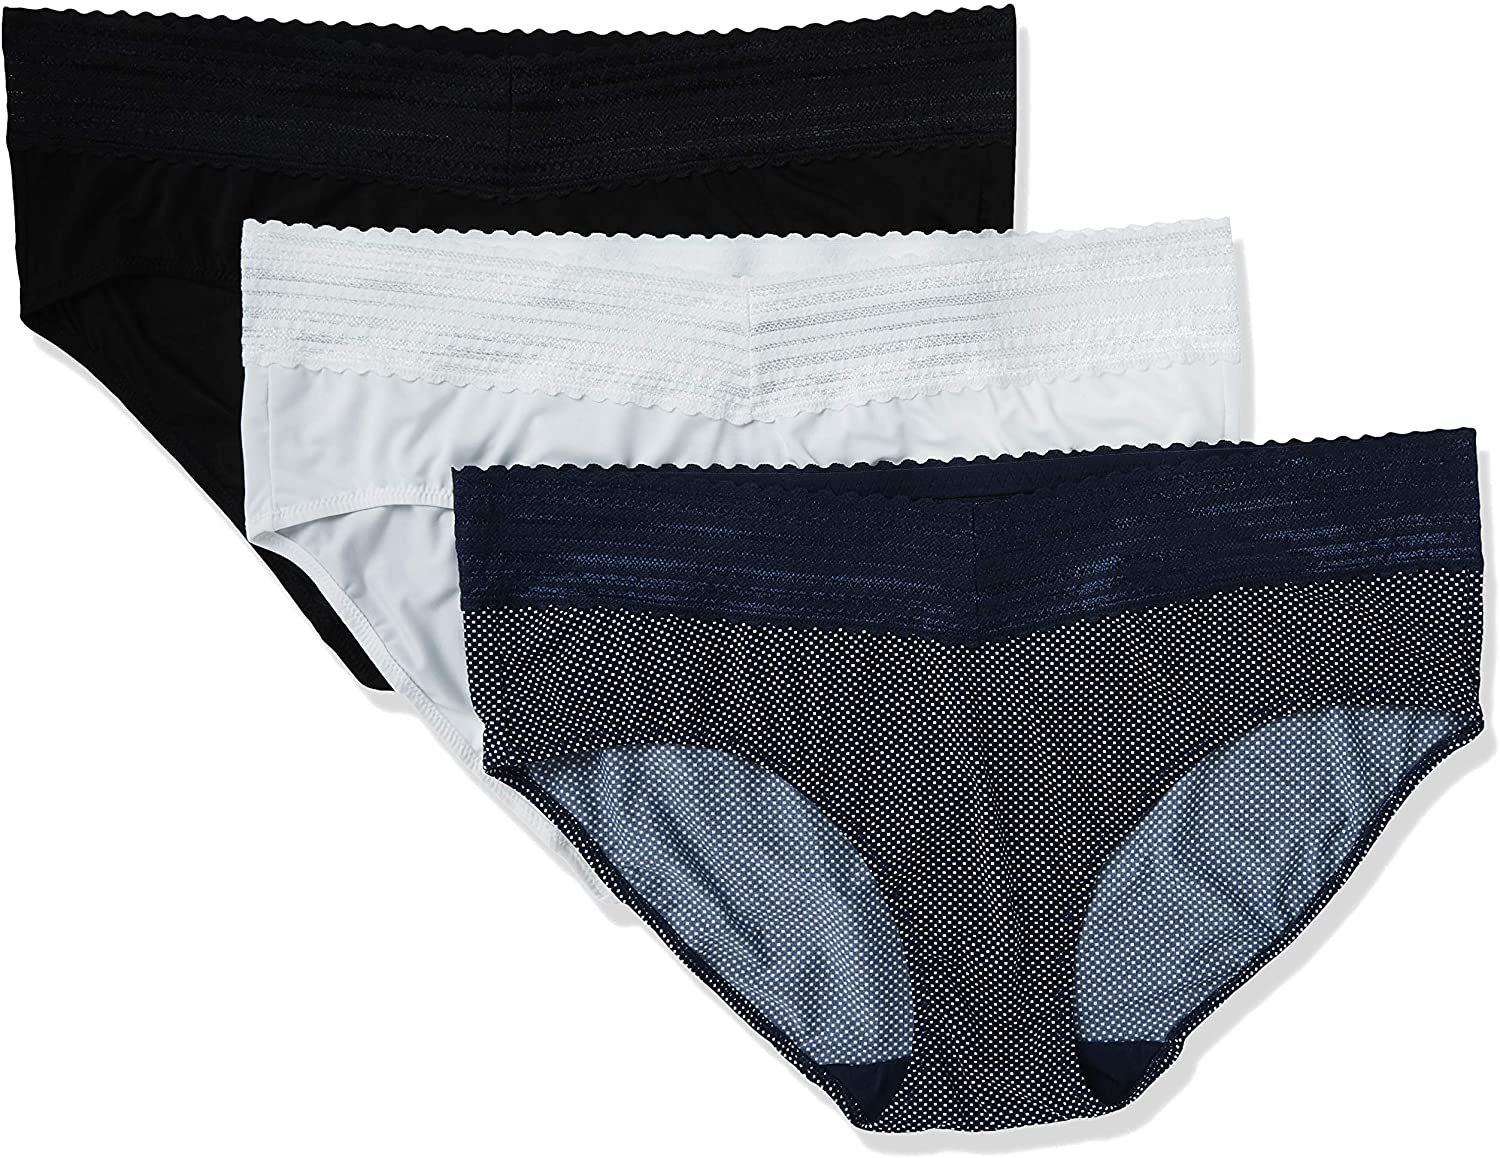 Blissful Benefits by Warner's No Muffin Top Hipster Panties 3pk for